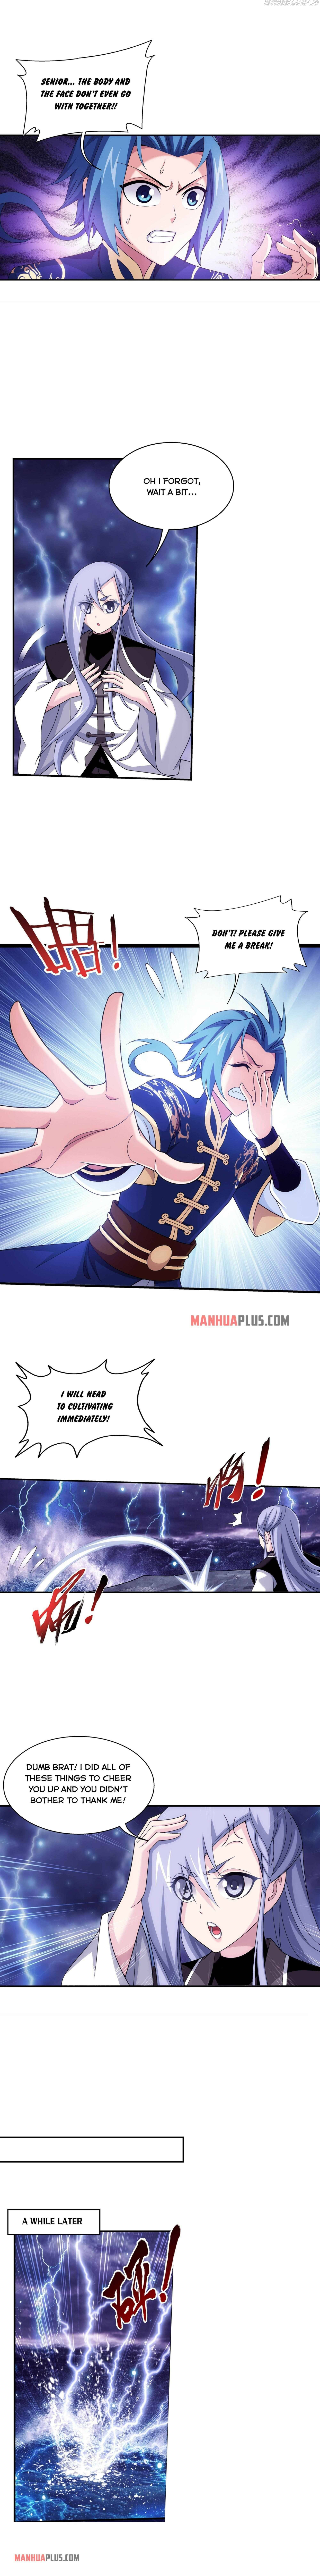 The Great Ruler Chapter 274 - Page 6